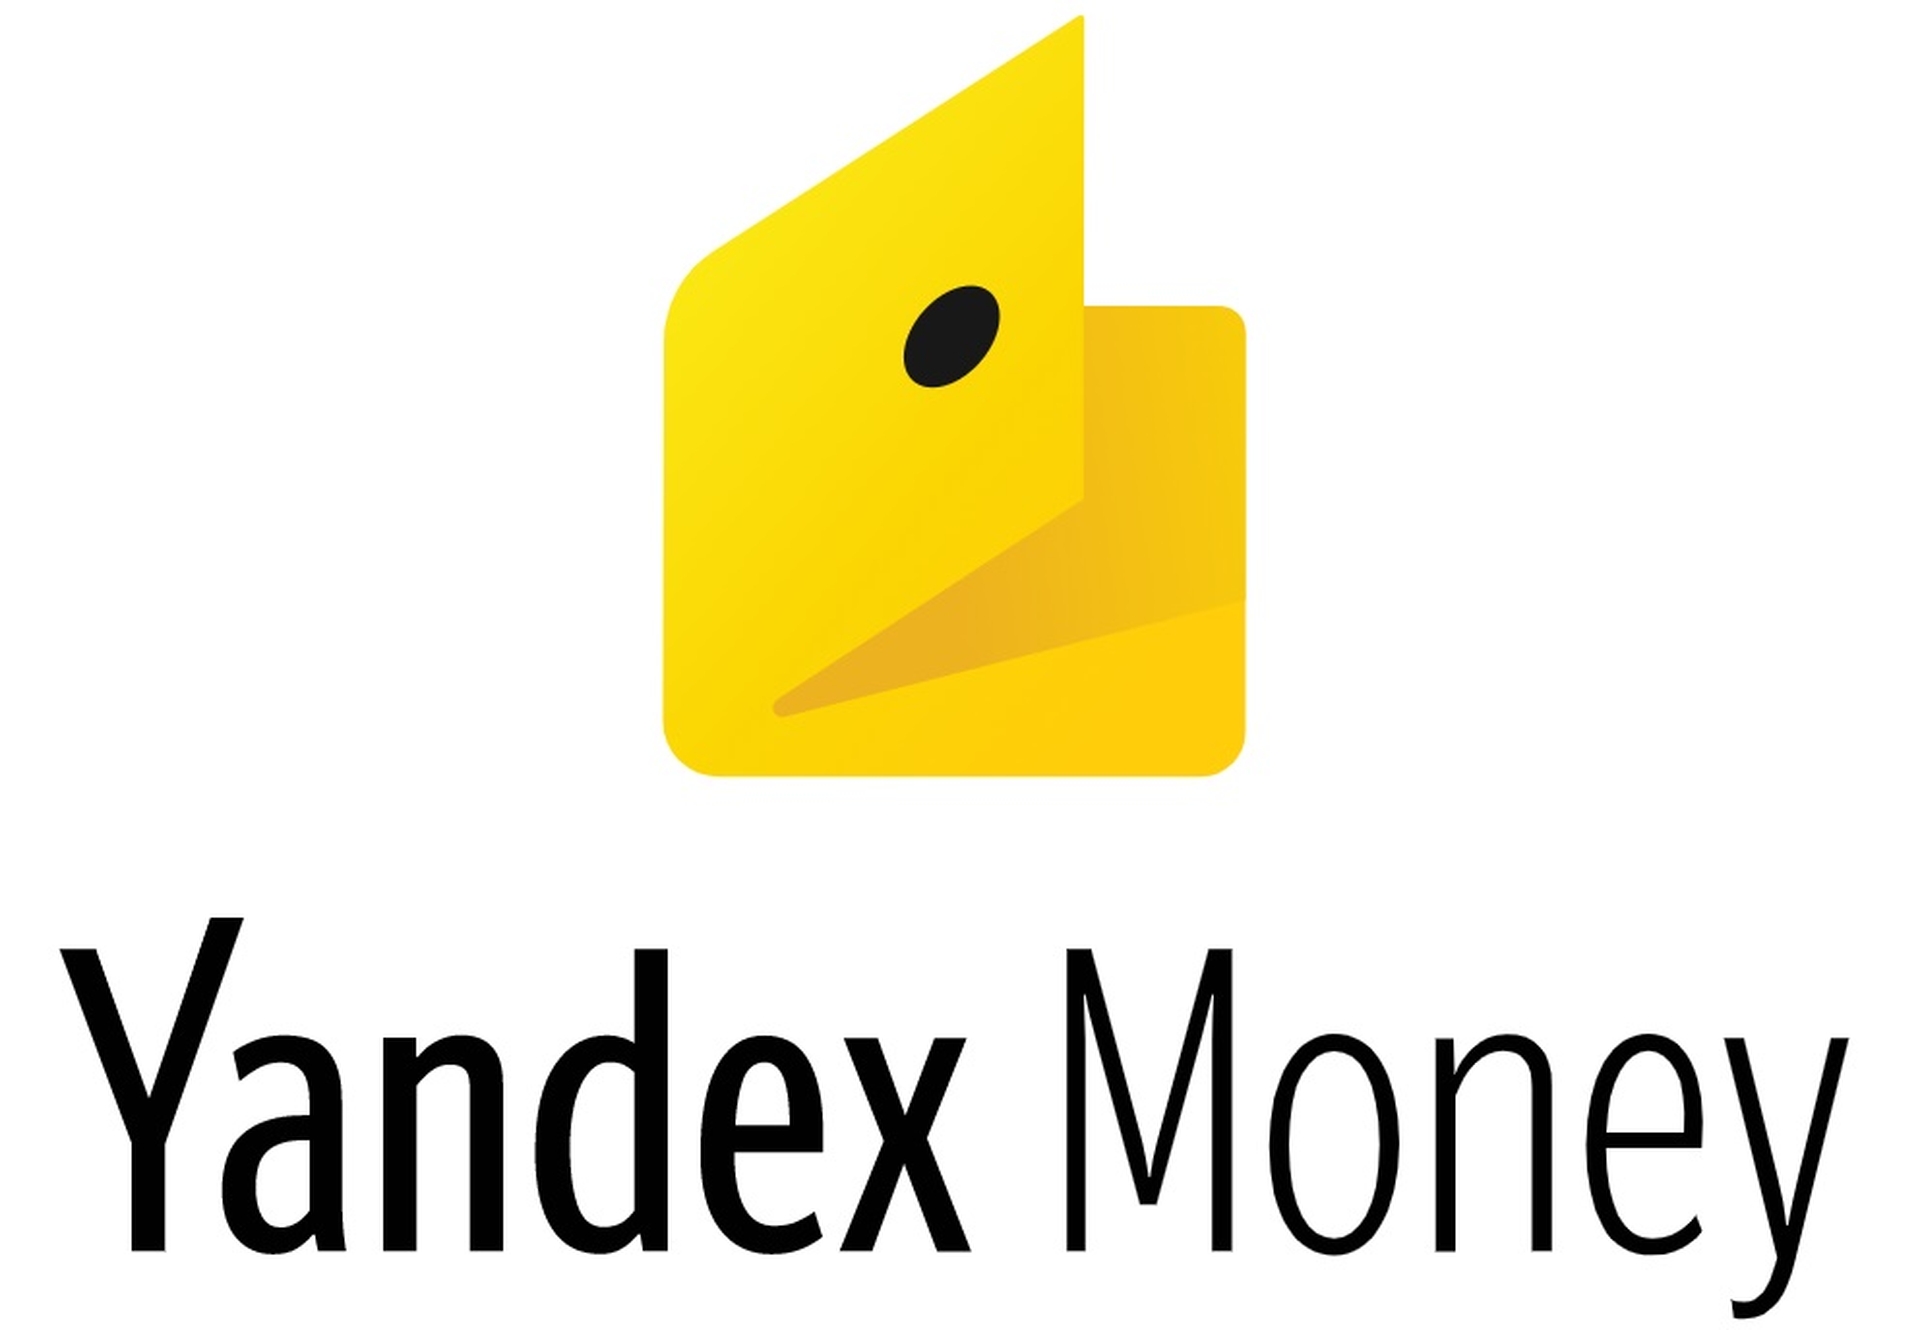 How To Buy Bitcoin With Yandex Money? | TechBriefly